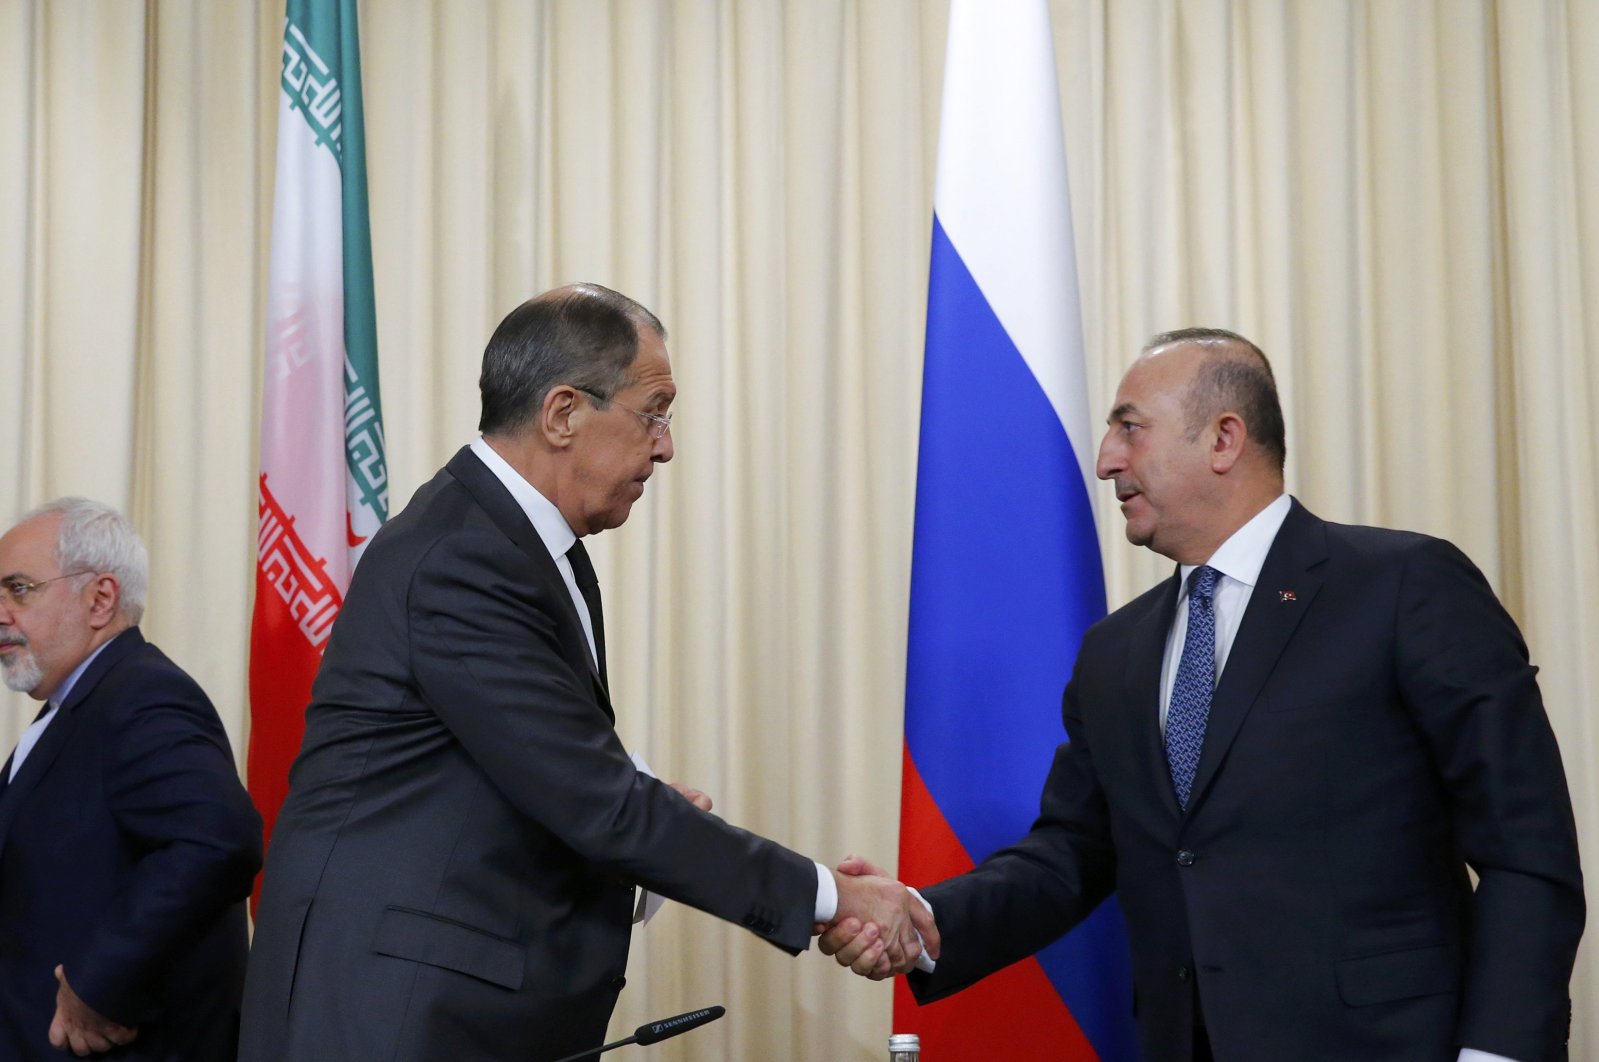 Russian Foreign Ministers Sergei Lavrov (C) and Turkish Foreign Minister Mevlüt Çavuşoğlu (R) shake hands after a news conference in Moscow, Russia, Dec. 20, 2016. (REUTERS Photo)